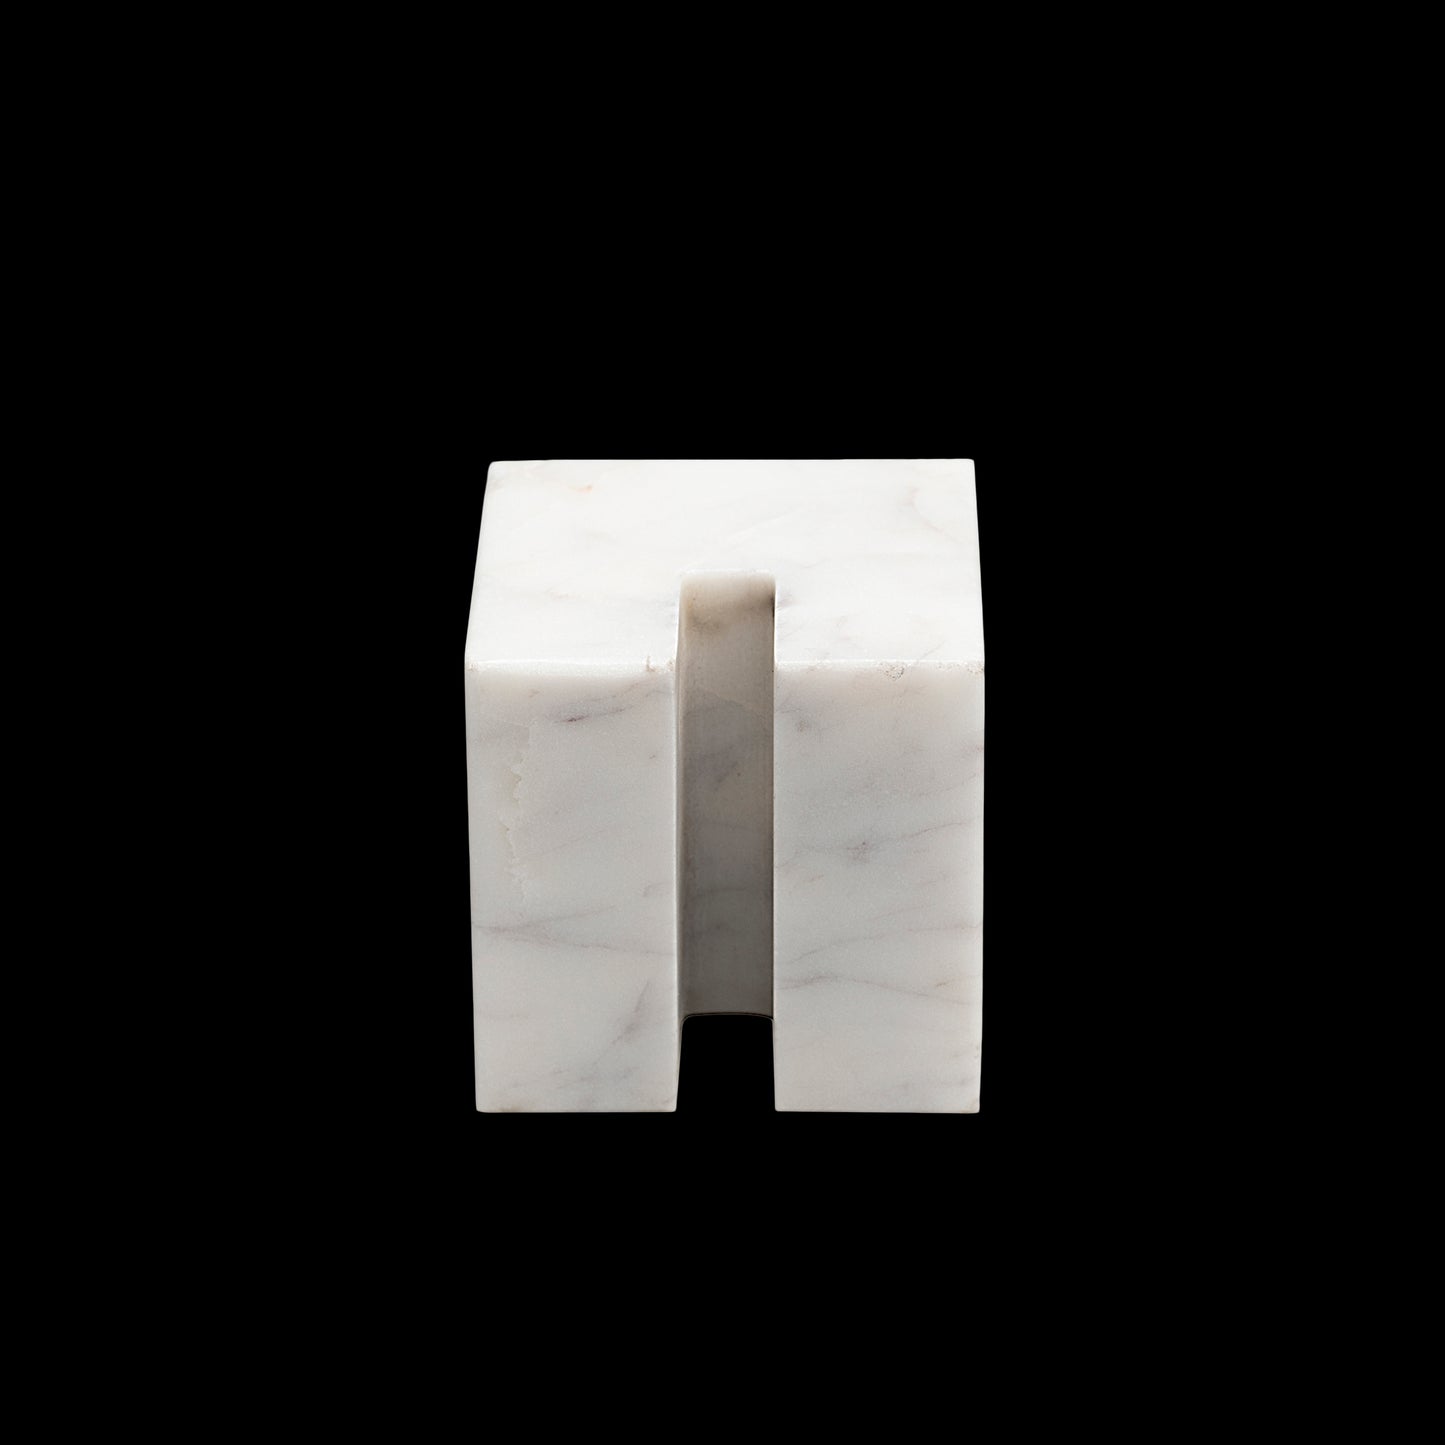 Opulent Homes  White Pearl Cube Shape Paper Weight